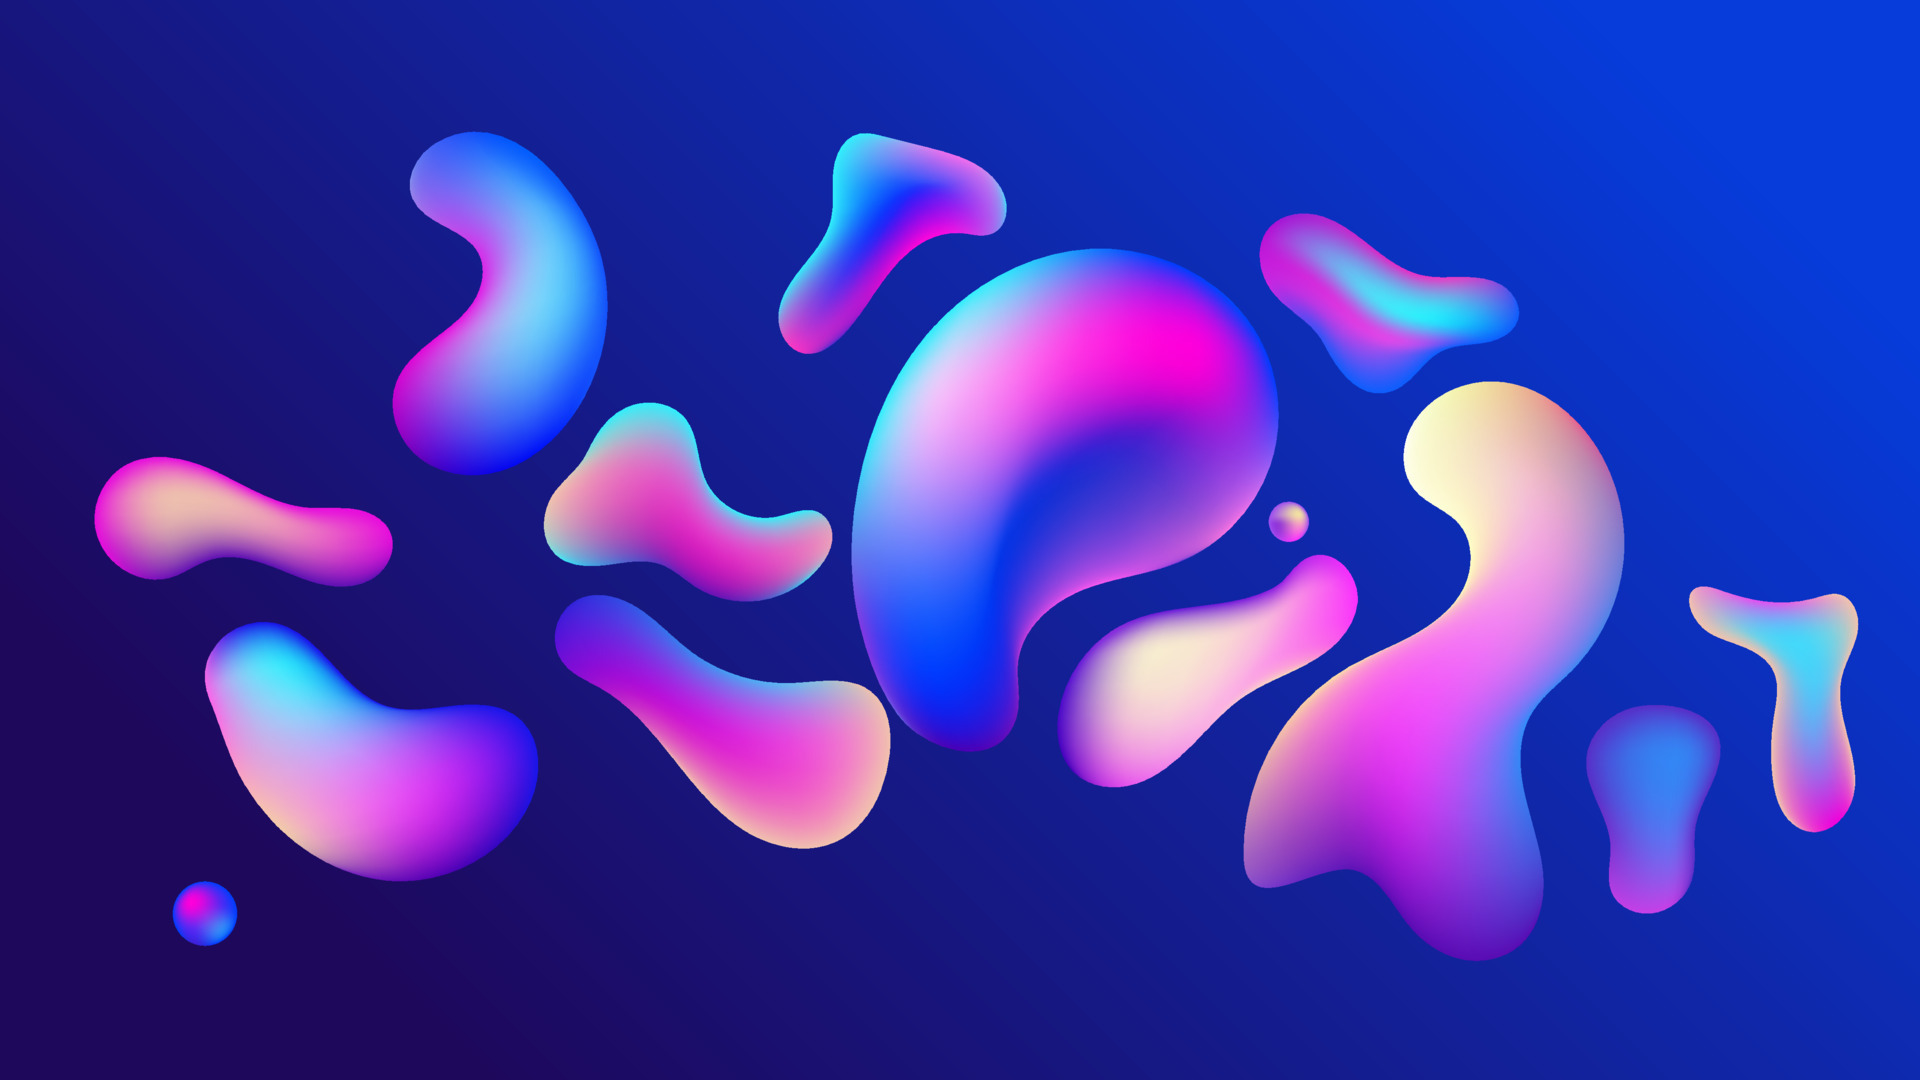 Liquid flow purple, blue 3D neon lava lamp vector geometric background for  banner, card, UI design or wallpaper. Gradient mesh bubble in the shape of  a wave drop. Fluid colorful abstract shapes.